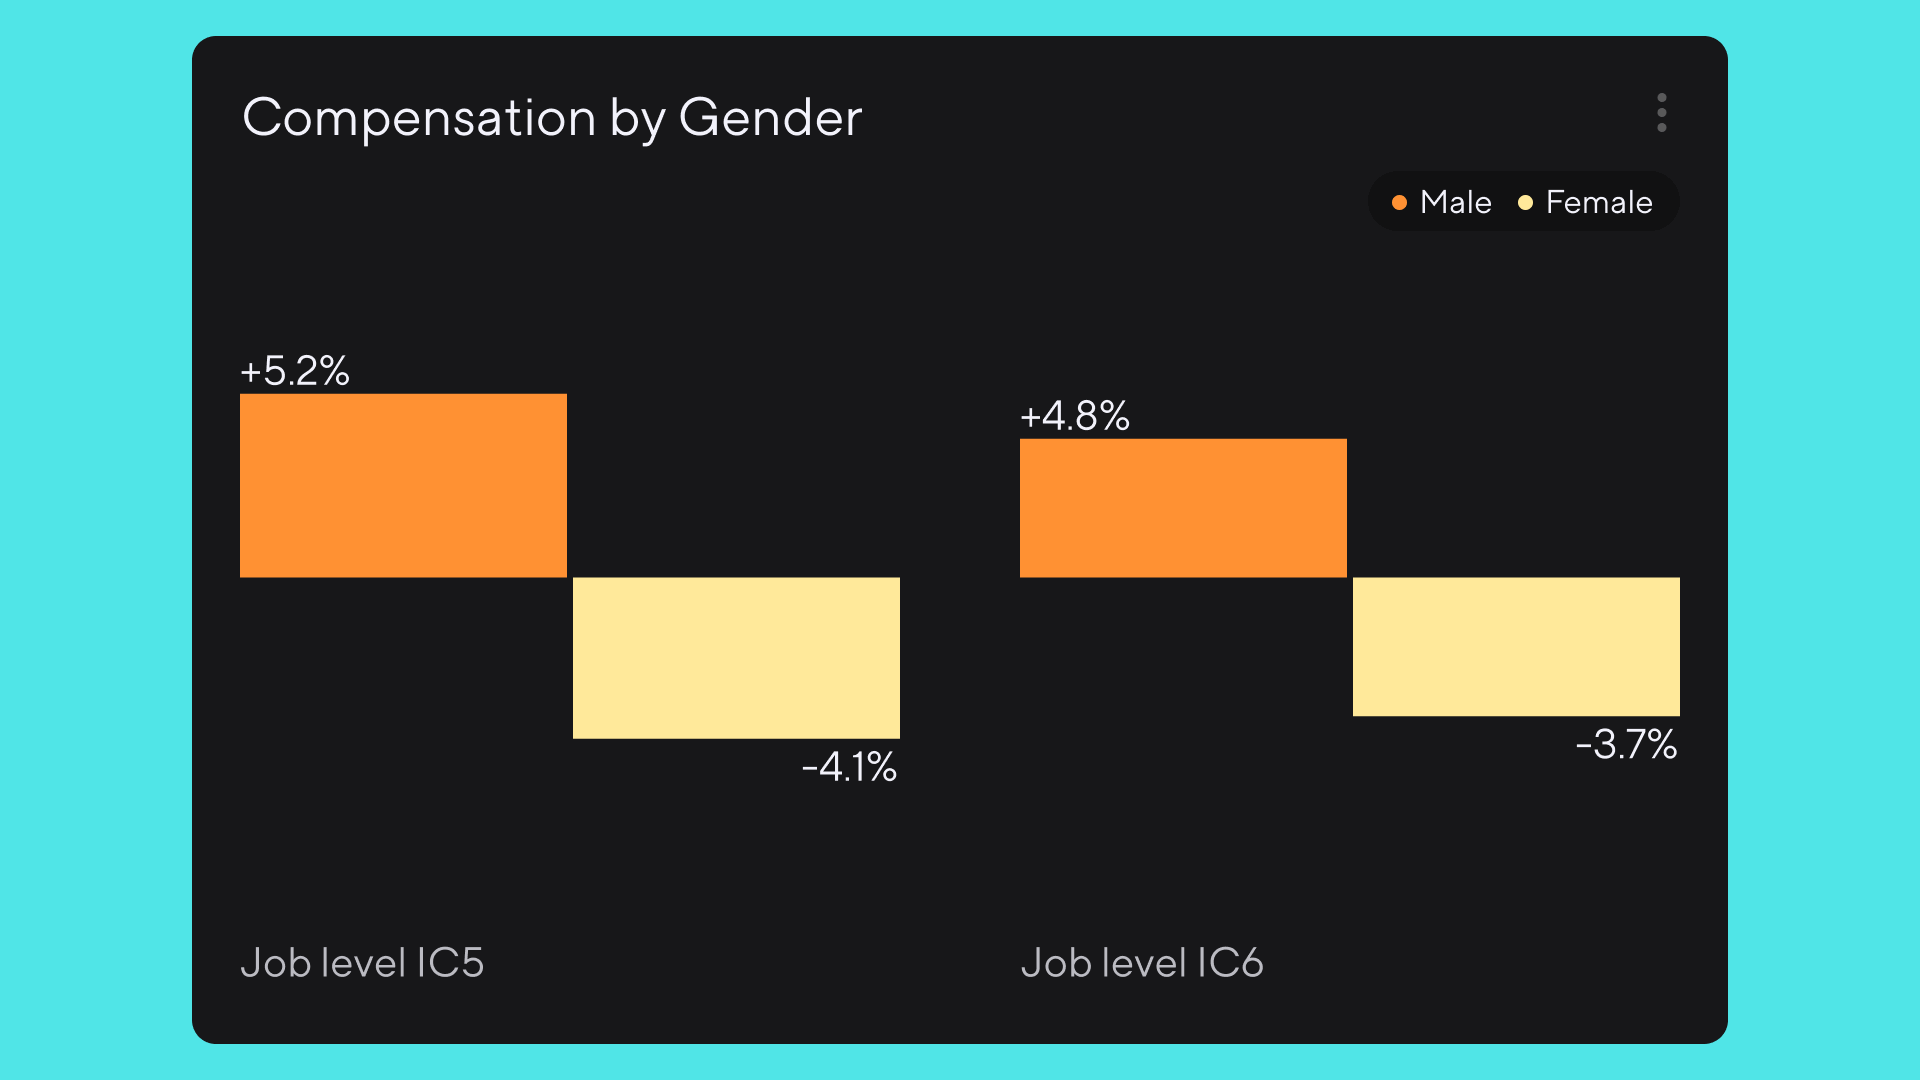 Bar graph titled Compensation by Gender. For job level IC5, male is plus 5.2% and female is minus 4.1%. For job level IC6, male is plus 4.8% and female is minus 3.7%.